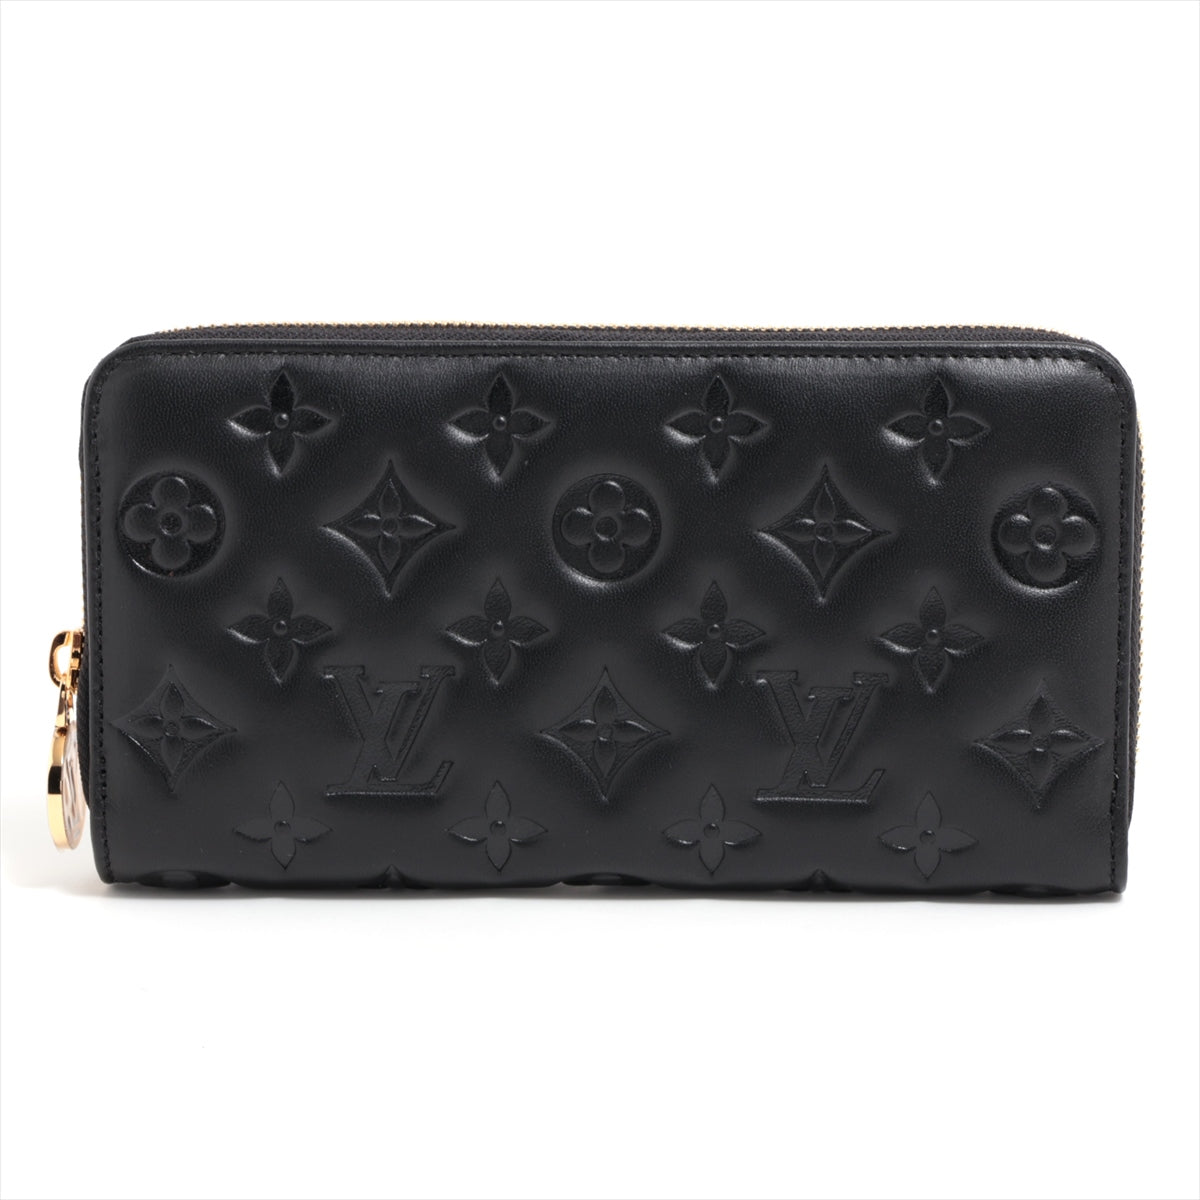 Louis Vuitton Monogram embossed Zippy Wallet M81510 Noir Zip Round Wallet RFID There is a reaction